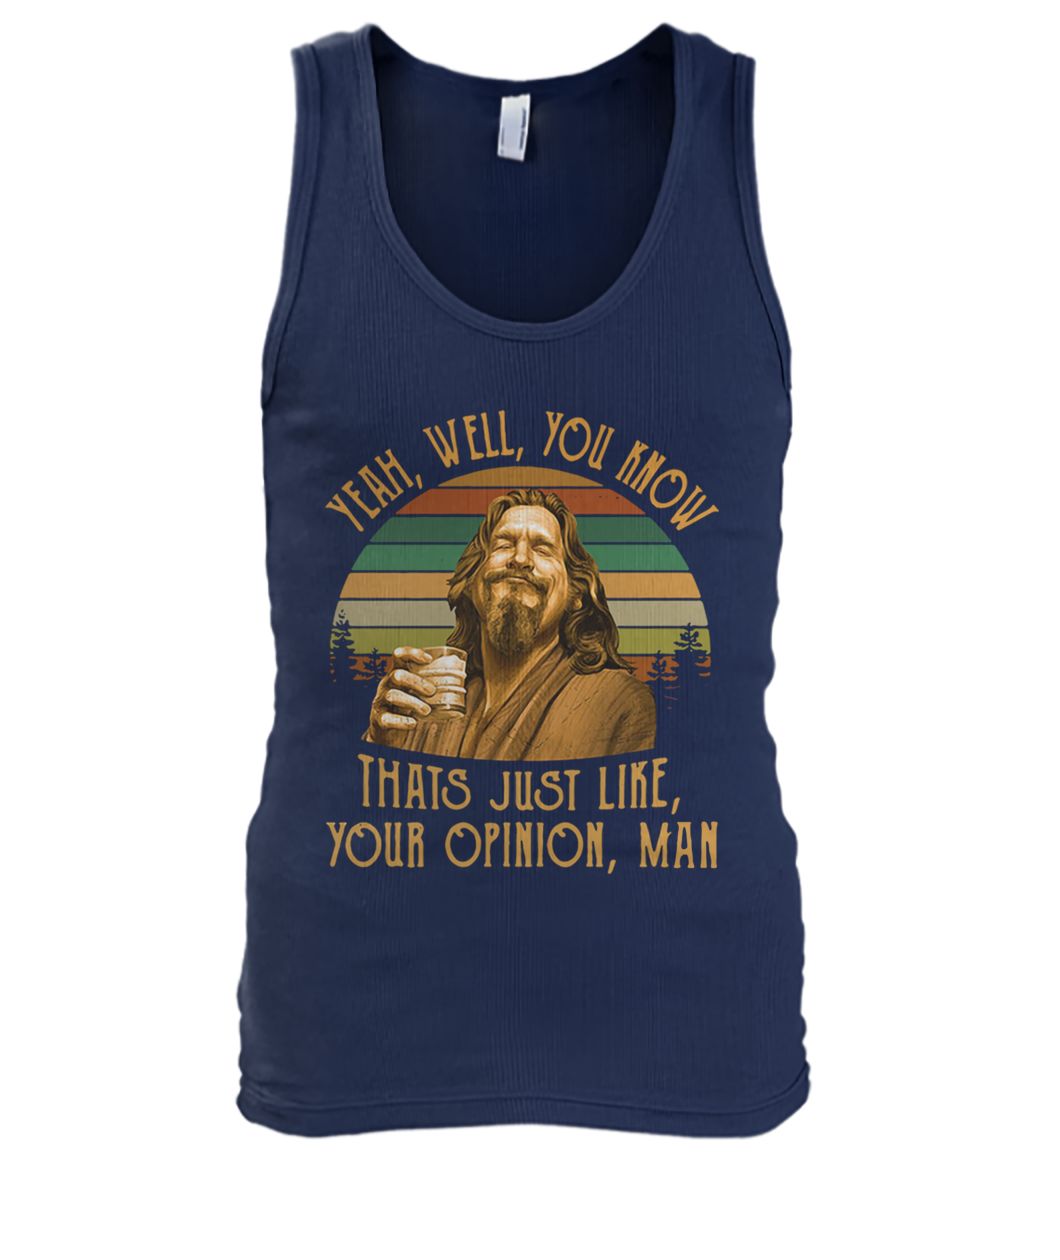 The big lebowski jeff bridges yeah well you know thats just like your opinion man vintage men's tank top